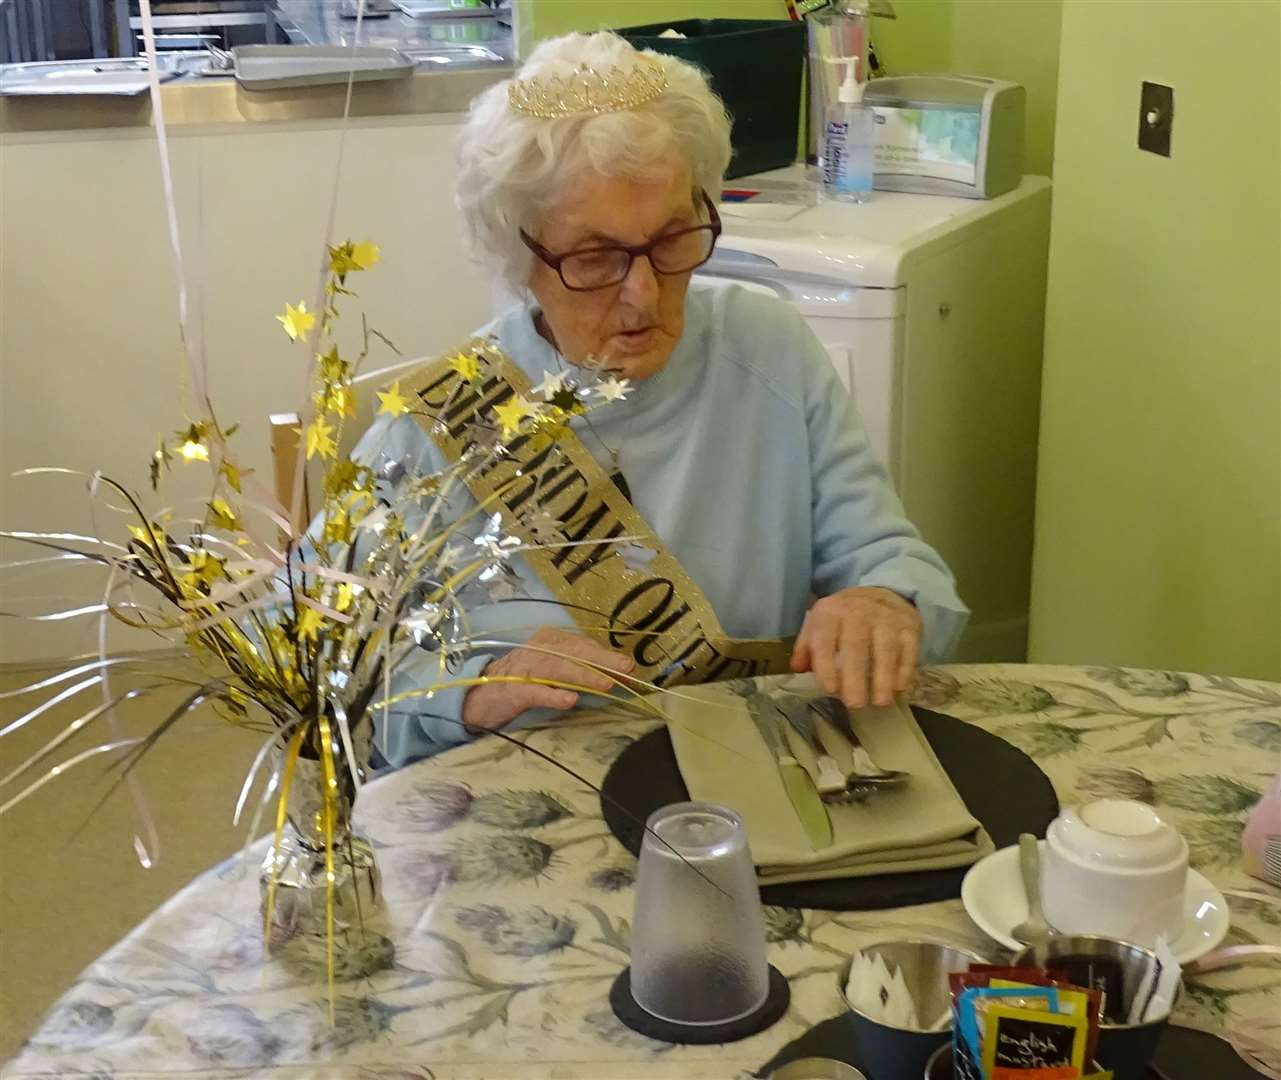 Agnes Williams, a resident of the Isobel Fraser Care Home in Inverness, liked to keep busy.